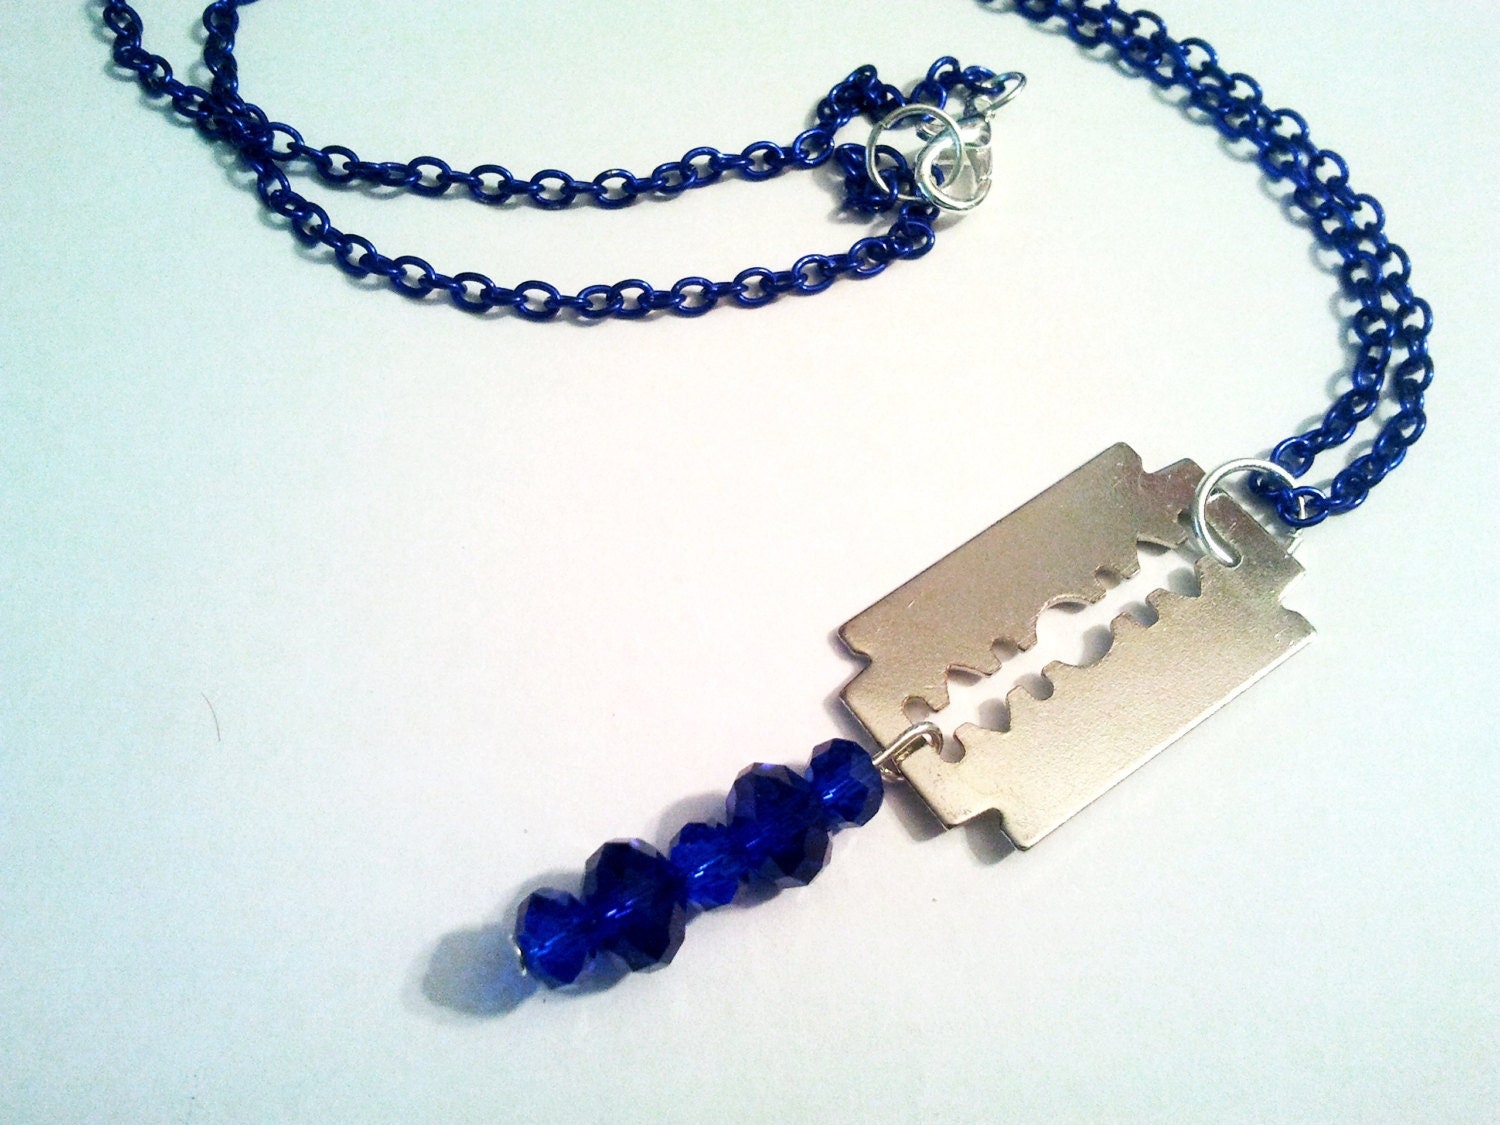 special Silver Razor Blade and blue beads Emo Kawaii link chain necklace